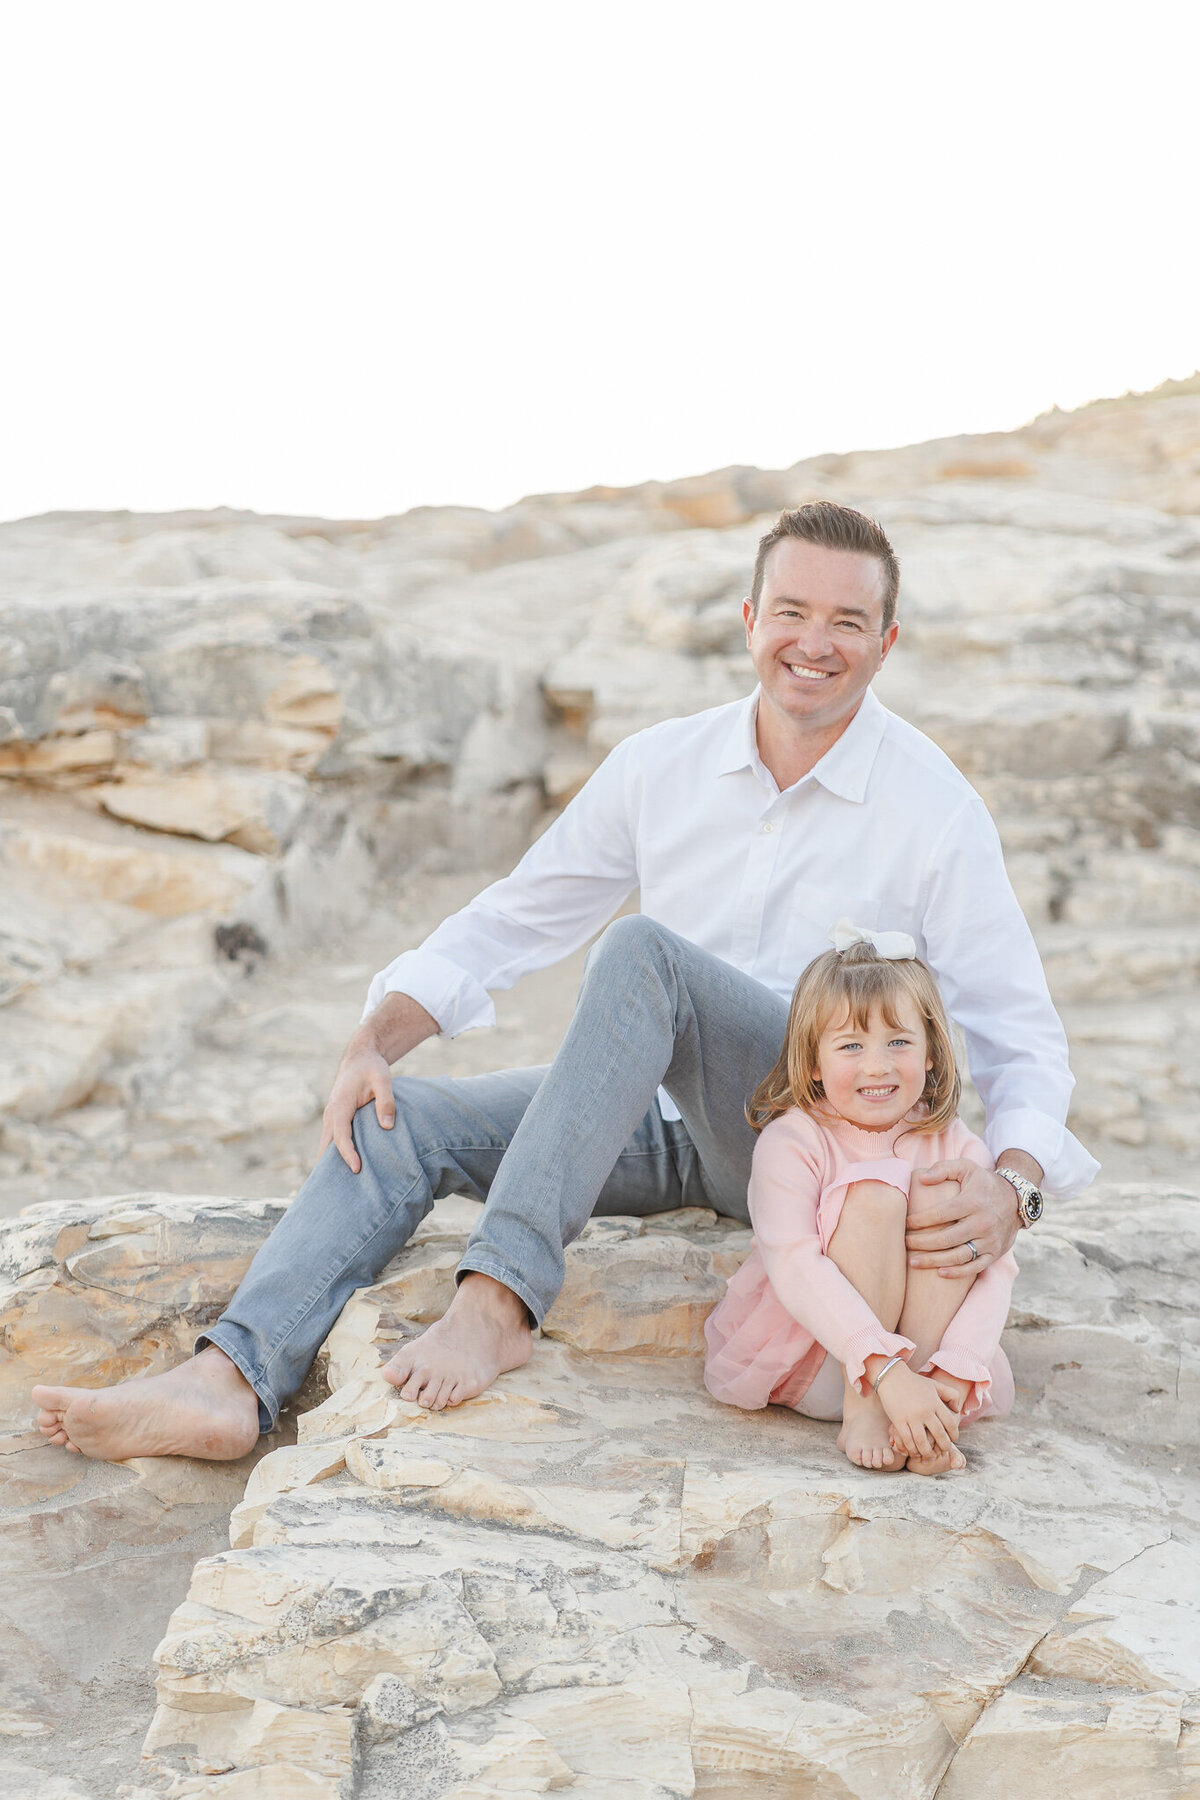 dad and daughter sitting together on a rock at the beach and smiling at the camera